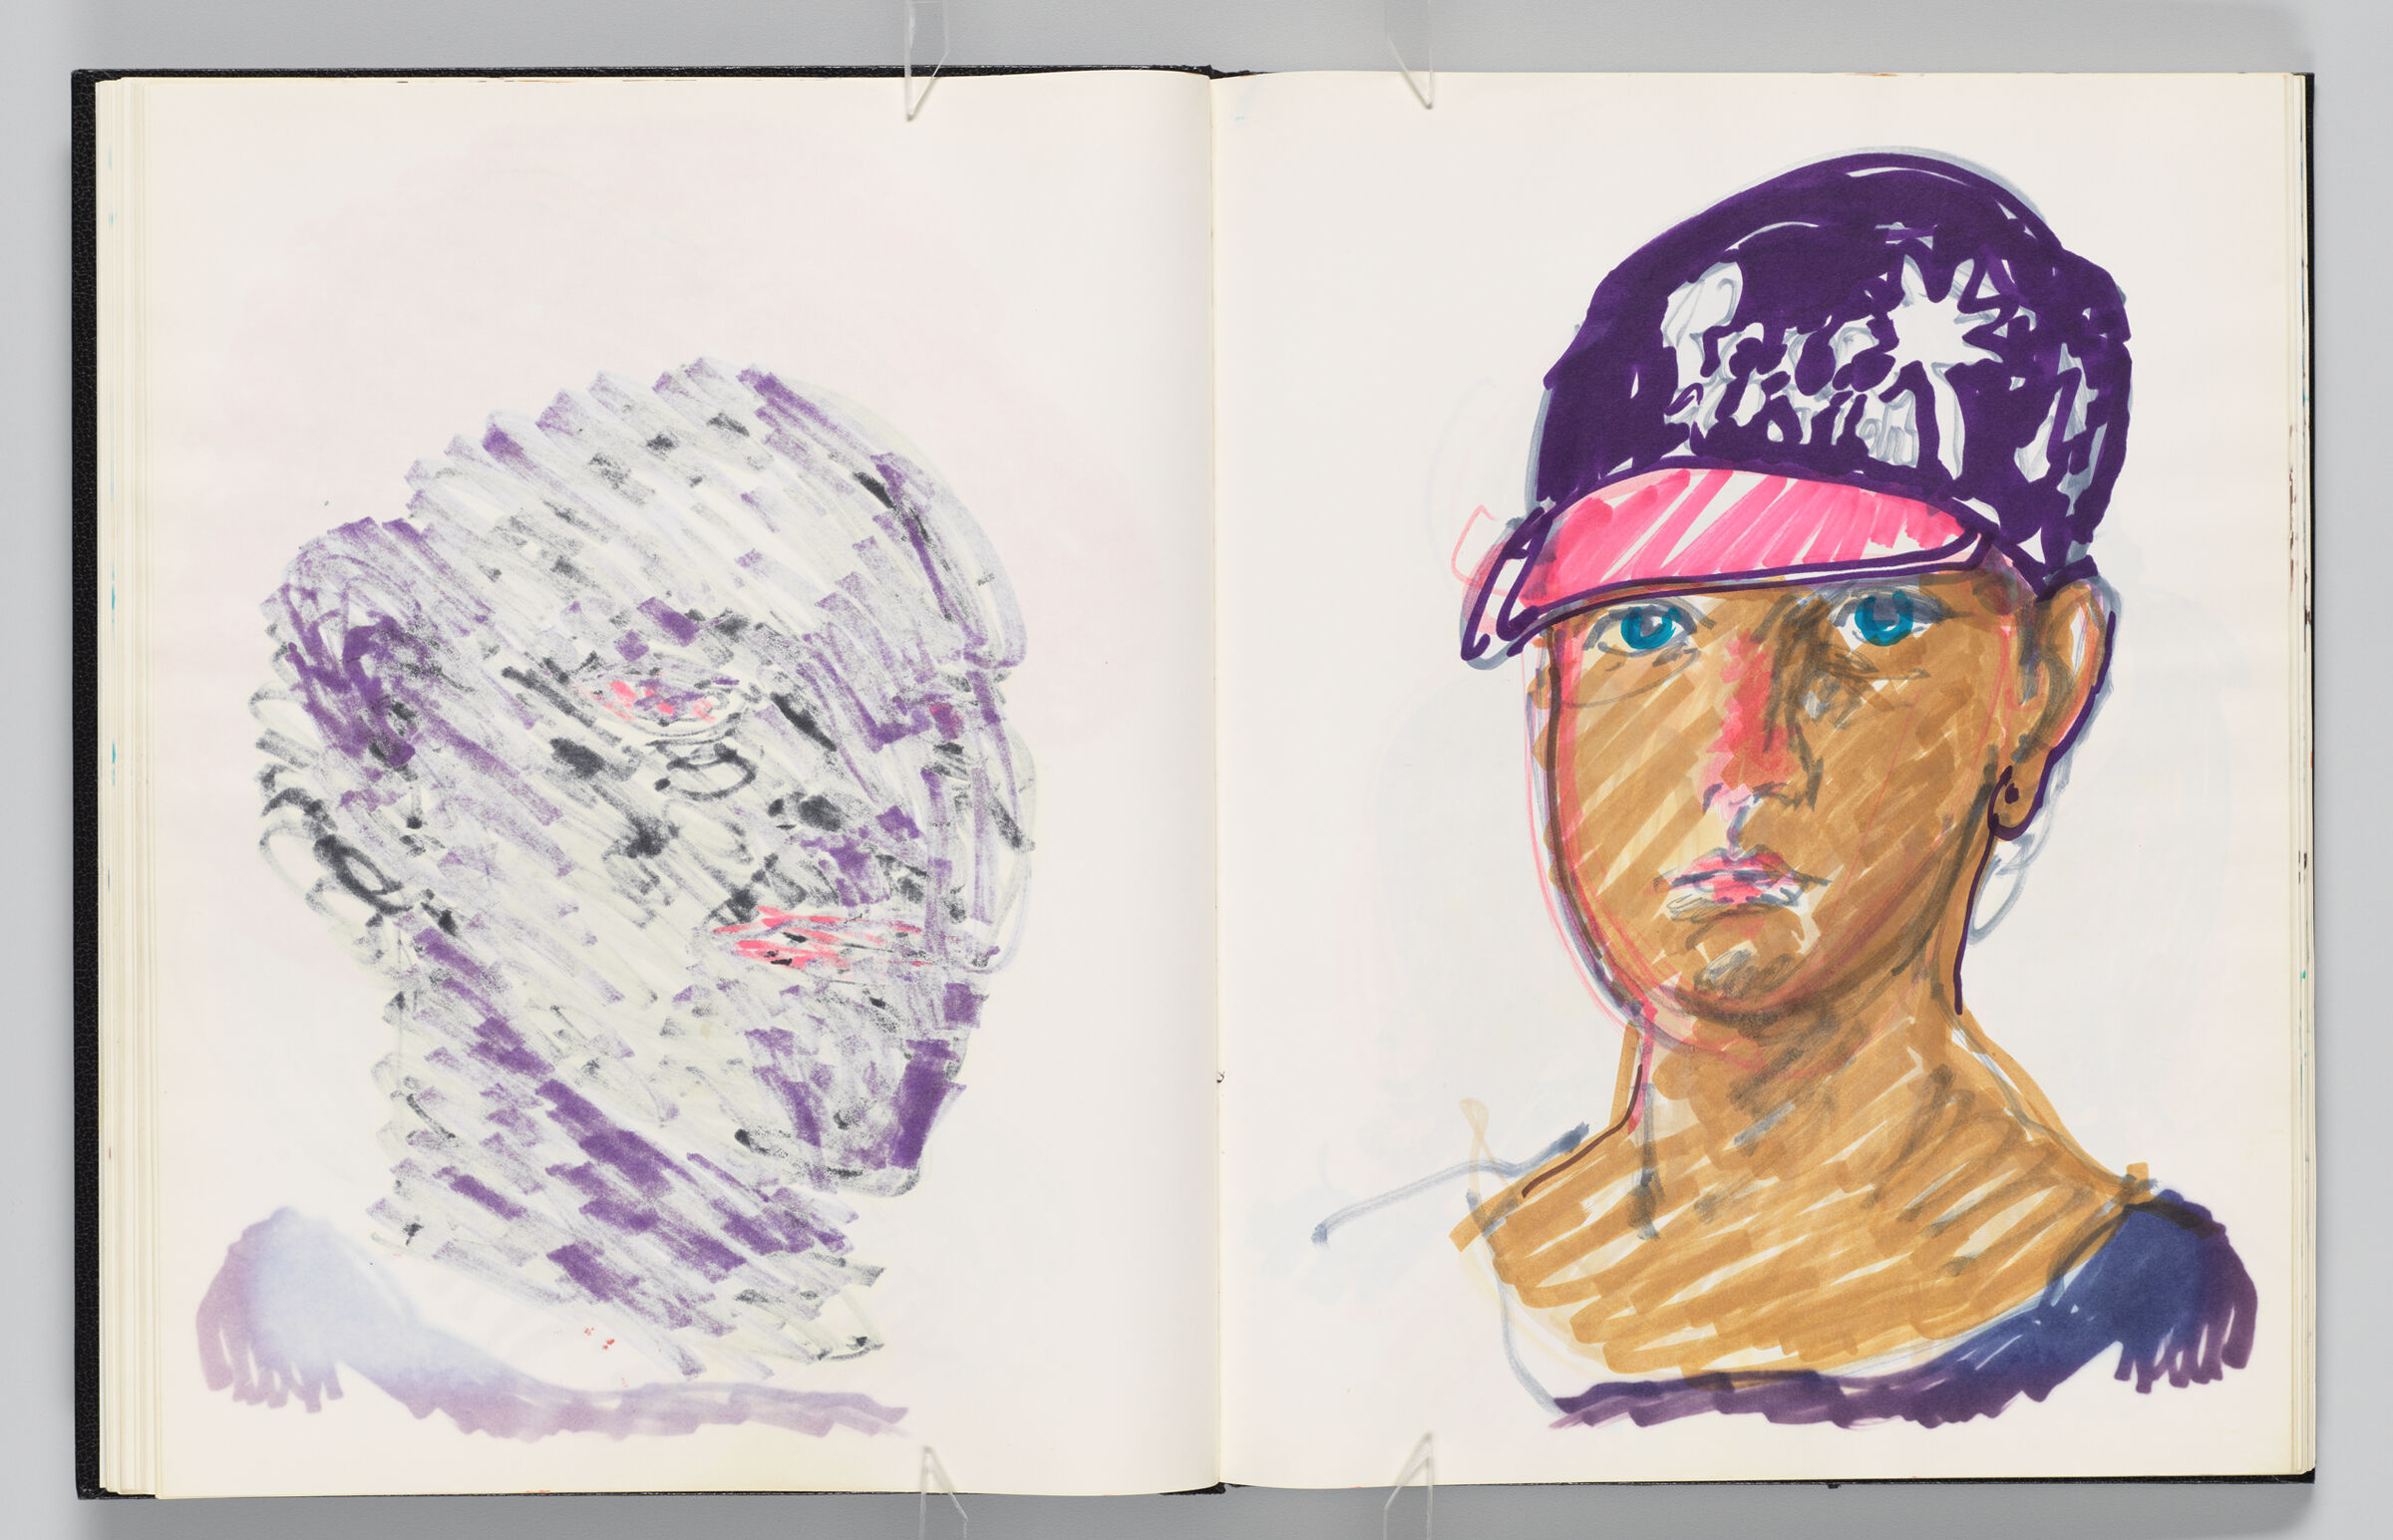 Untitled (Bleed-Through Of Previous Page, Left Page); Untitled (Portrait Of Male Figure, Right Page)